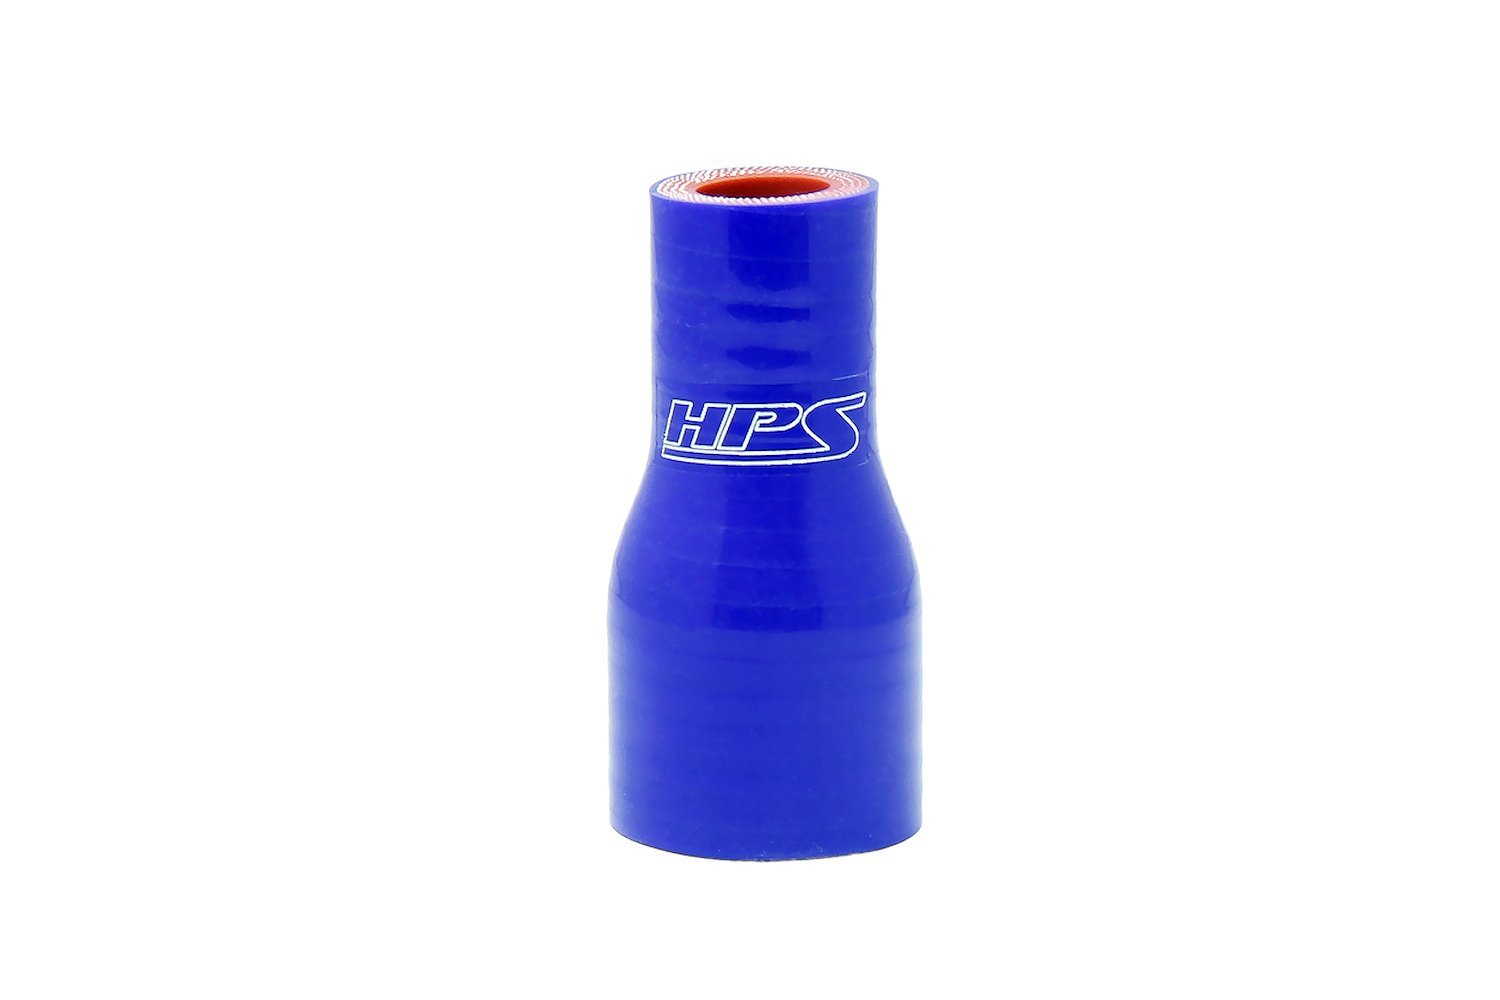 HTSR-112-138-BLUE Silicone Reducer Hose, High-Temp 4-Ply Reinforced, 1-1/8 in. - 1-3/8 in. ID, 3 in. Long, Blue